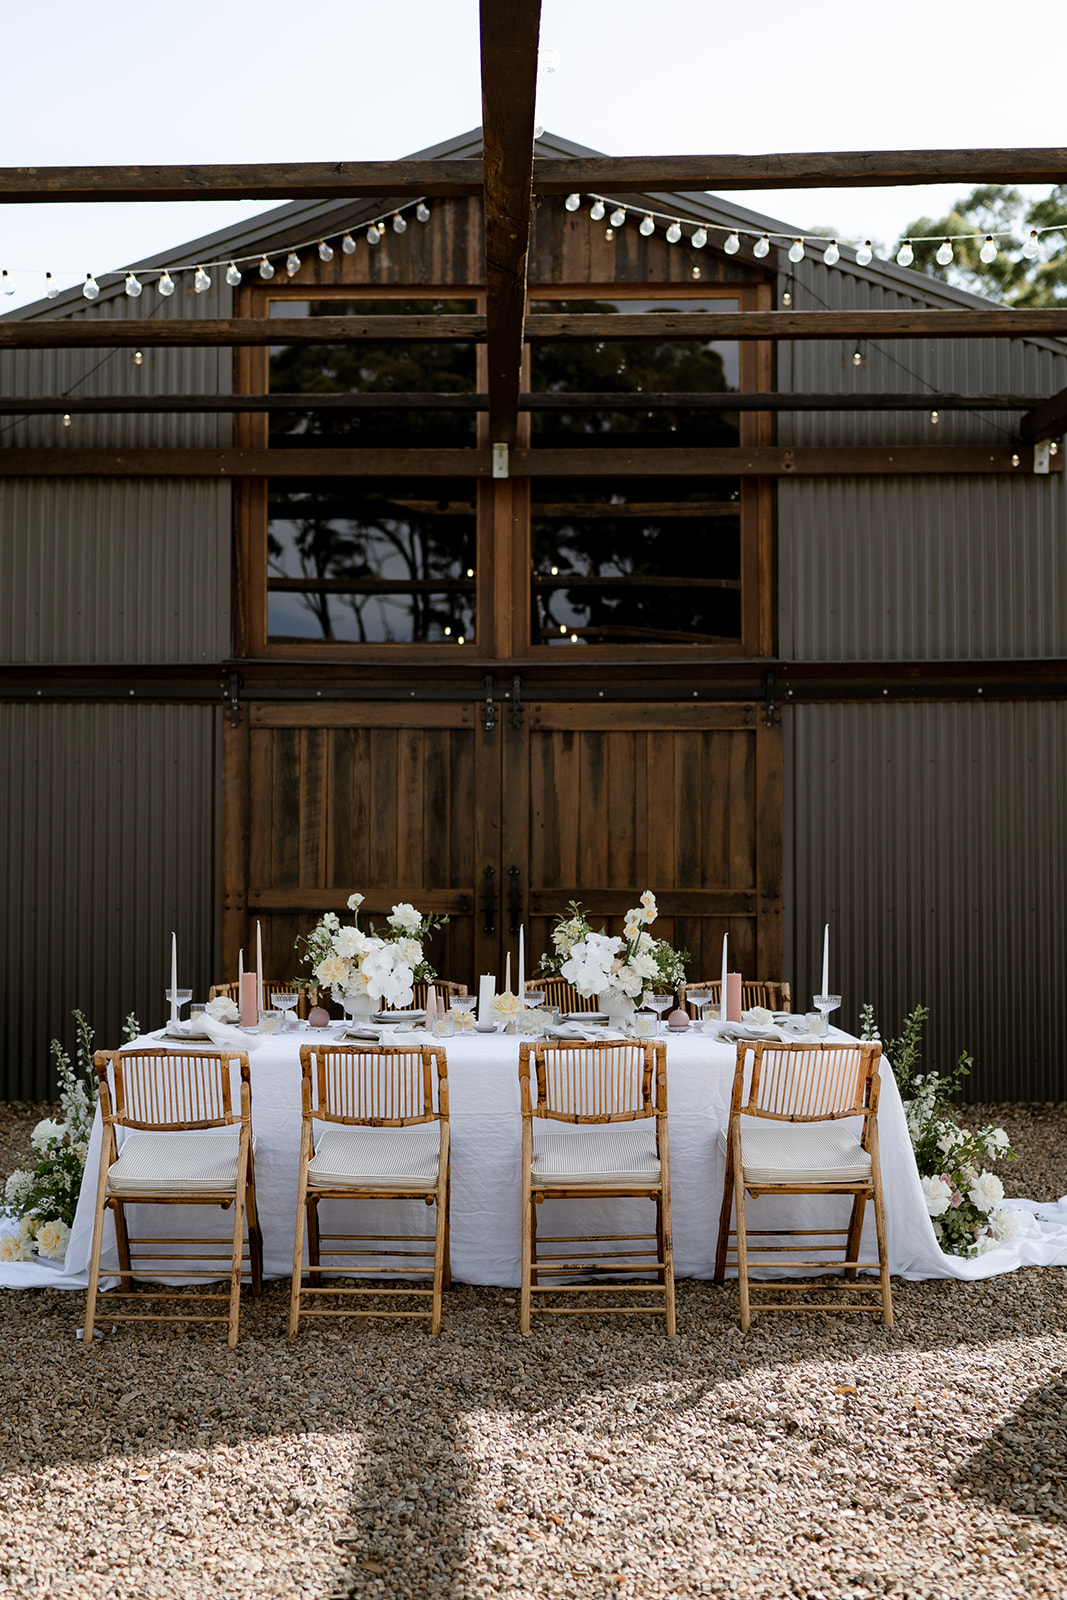 French garden vibes outside the newly built barn, styled by Zoe Wright from Panorama Events